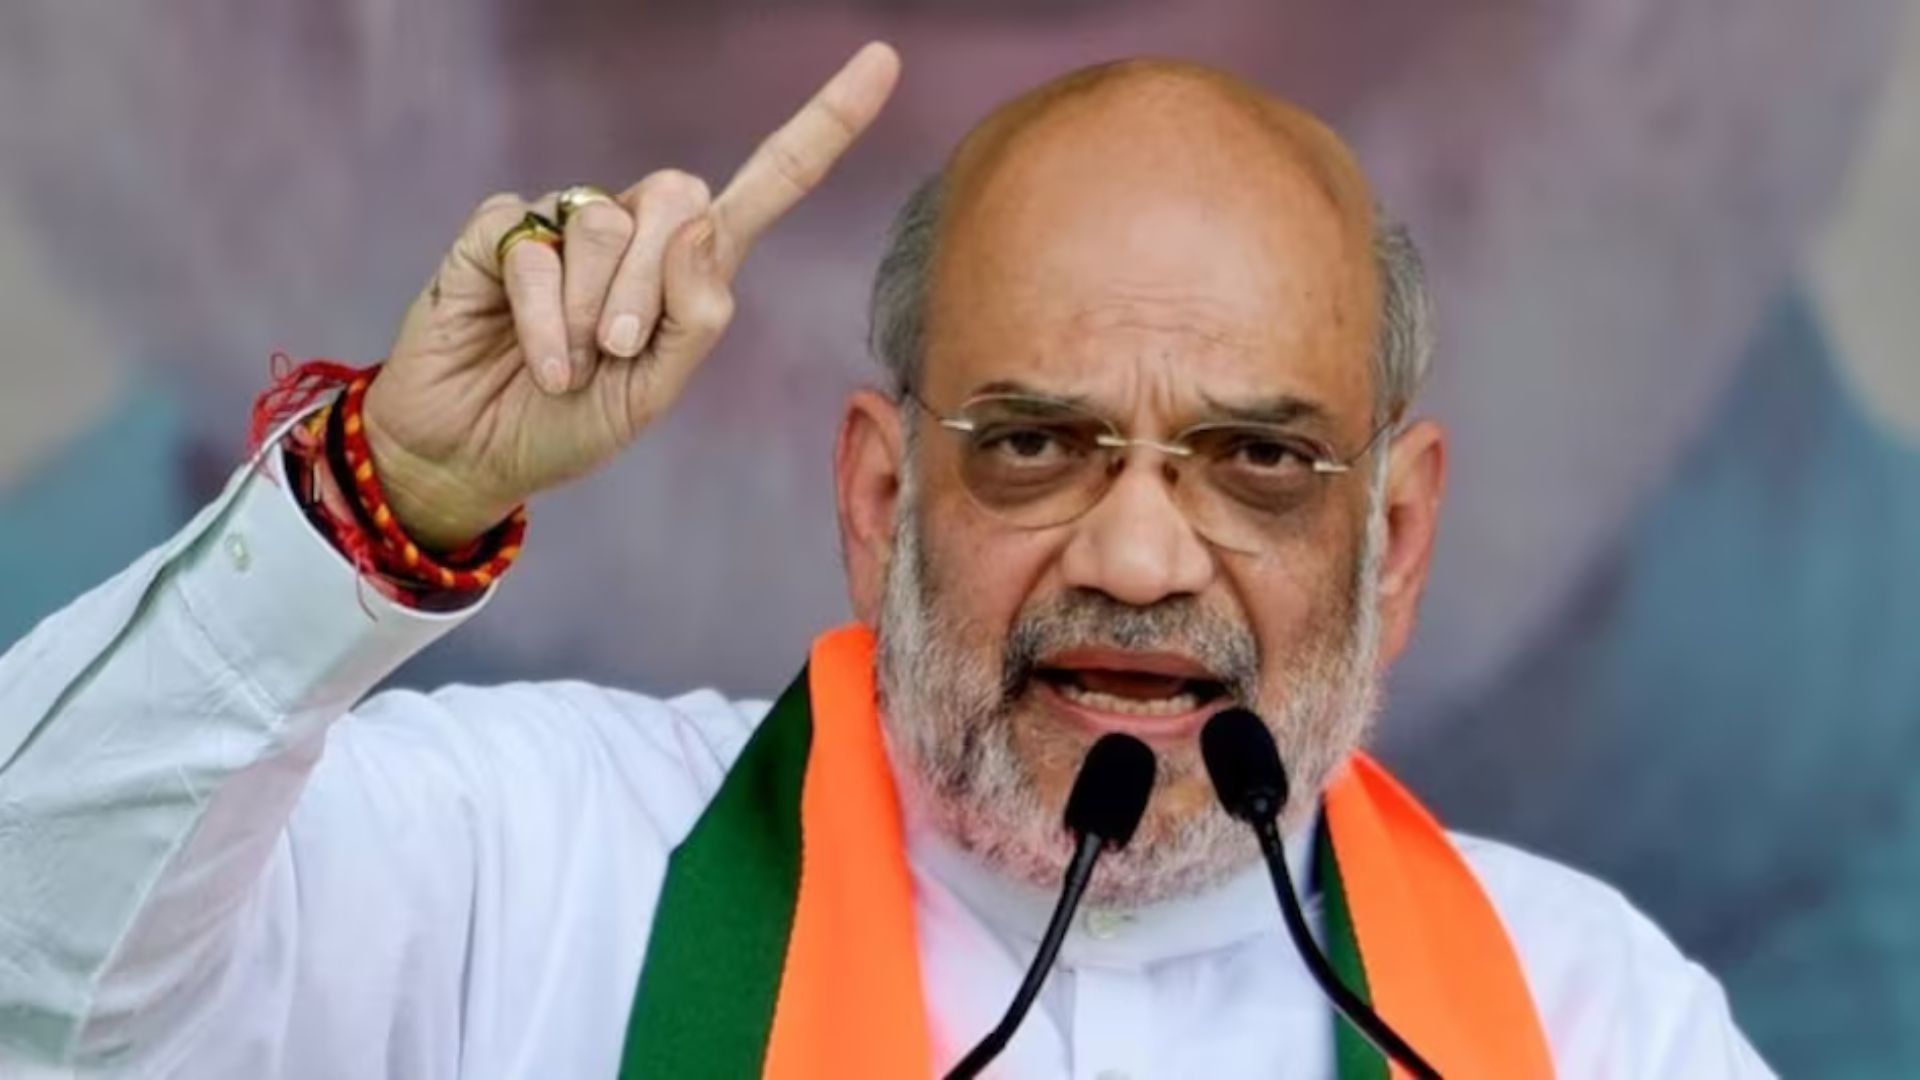 “Will Nuclear Power with 130-Cr Population Be Scared of Someone…”: Amit Shah Slams Farooq Abdullah over PoK Remarks